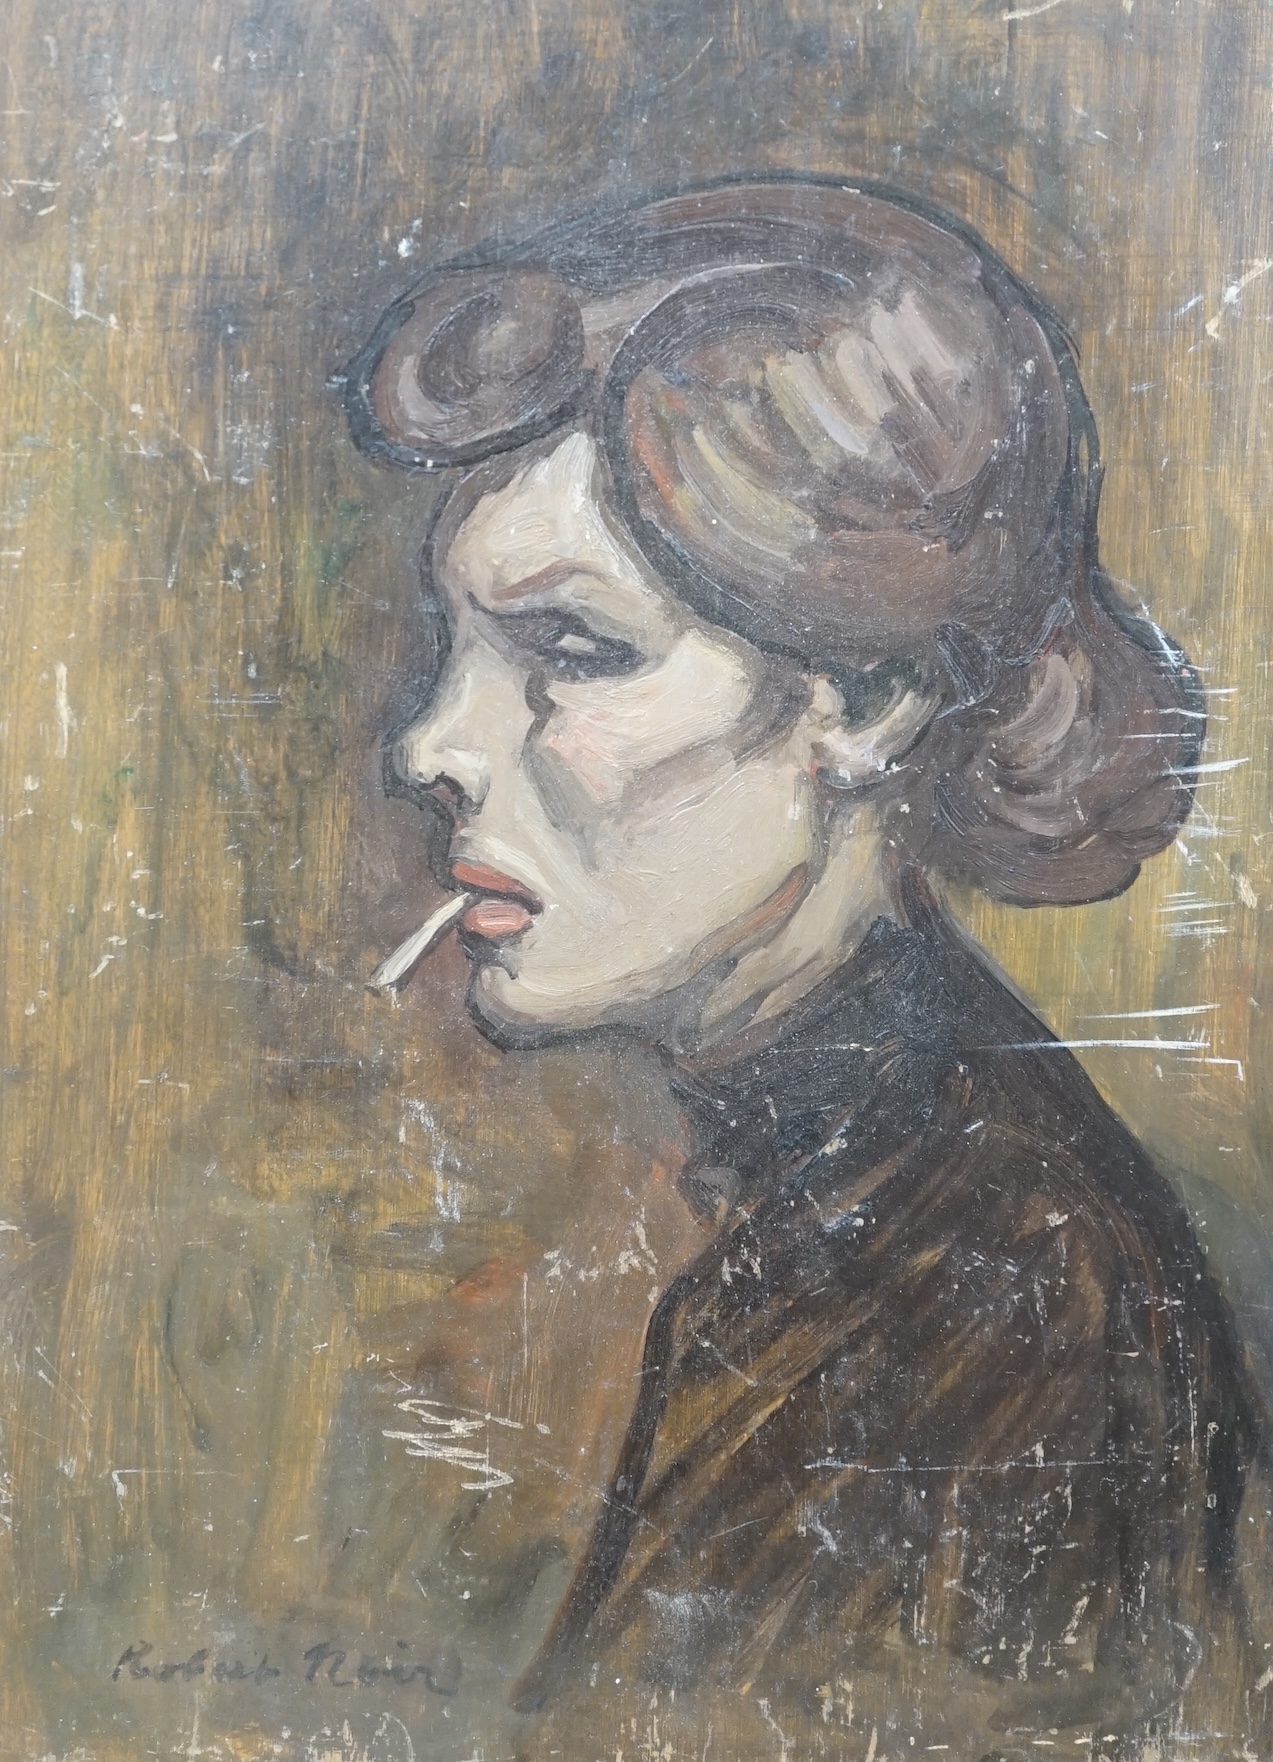 Ernest Robert Salmon Noir (1864-1931), oil on board, Portrait of a woman, ‘La Rogue’, signed, 33 x 23cm, unframed. Condition - poor to fair, scuffs throughout